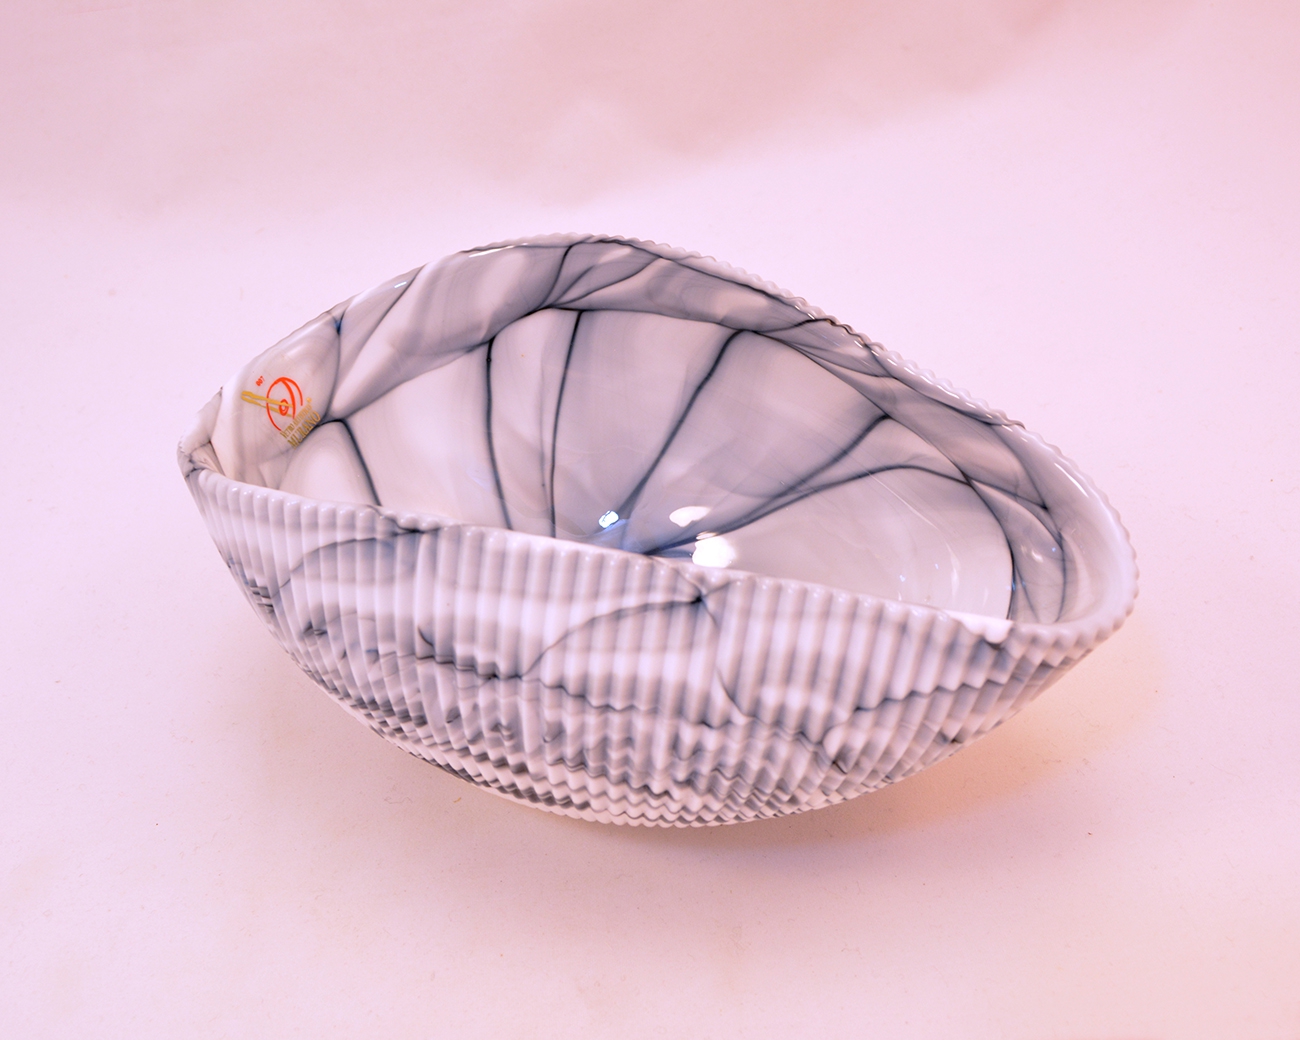 MIGNON MOTHER OF PEARL WITH BLACK AND WHITE SHELL CENTERPIECE